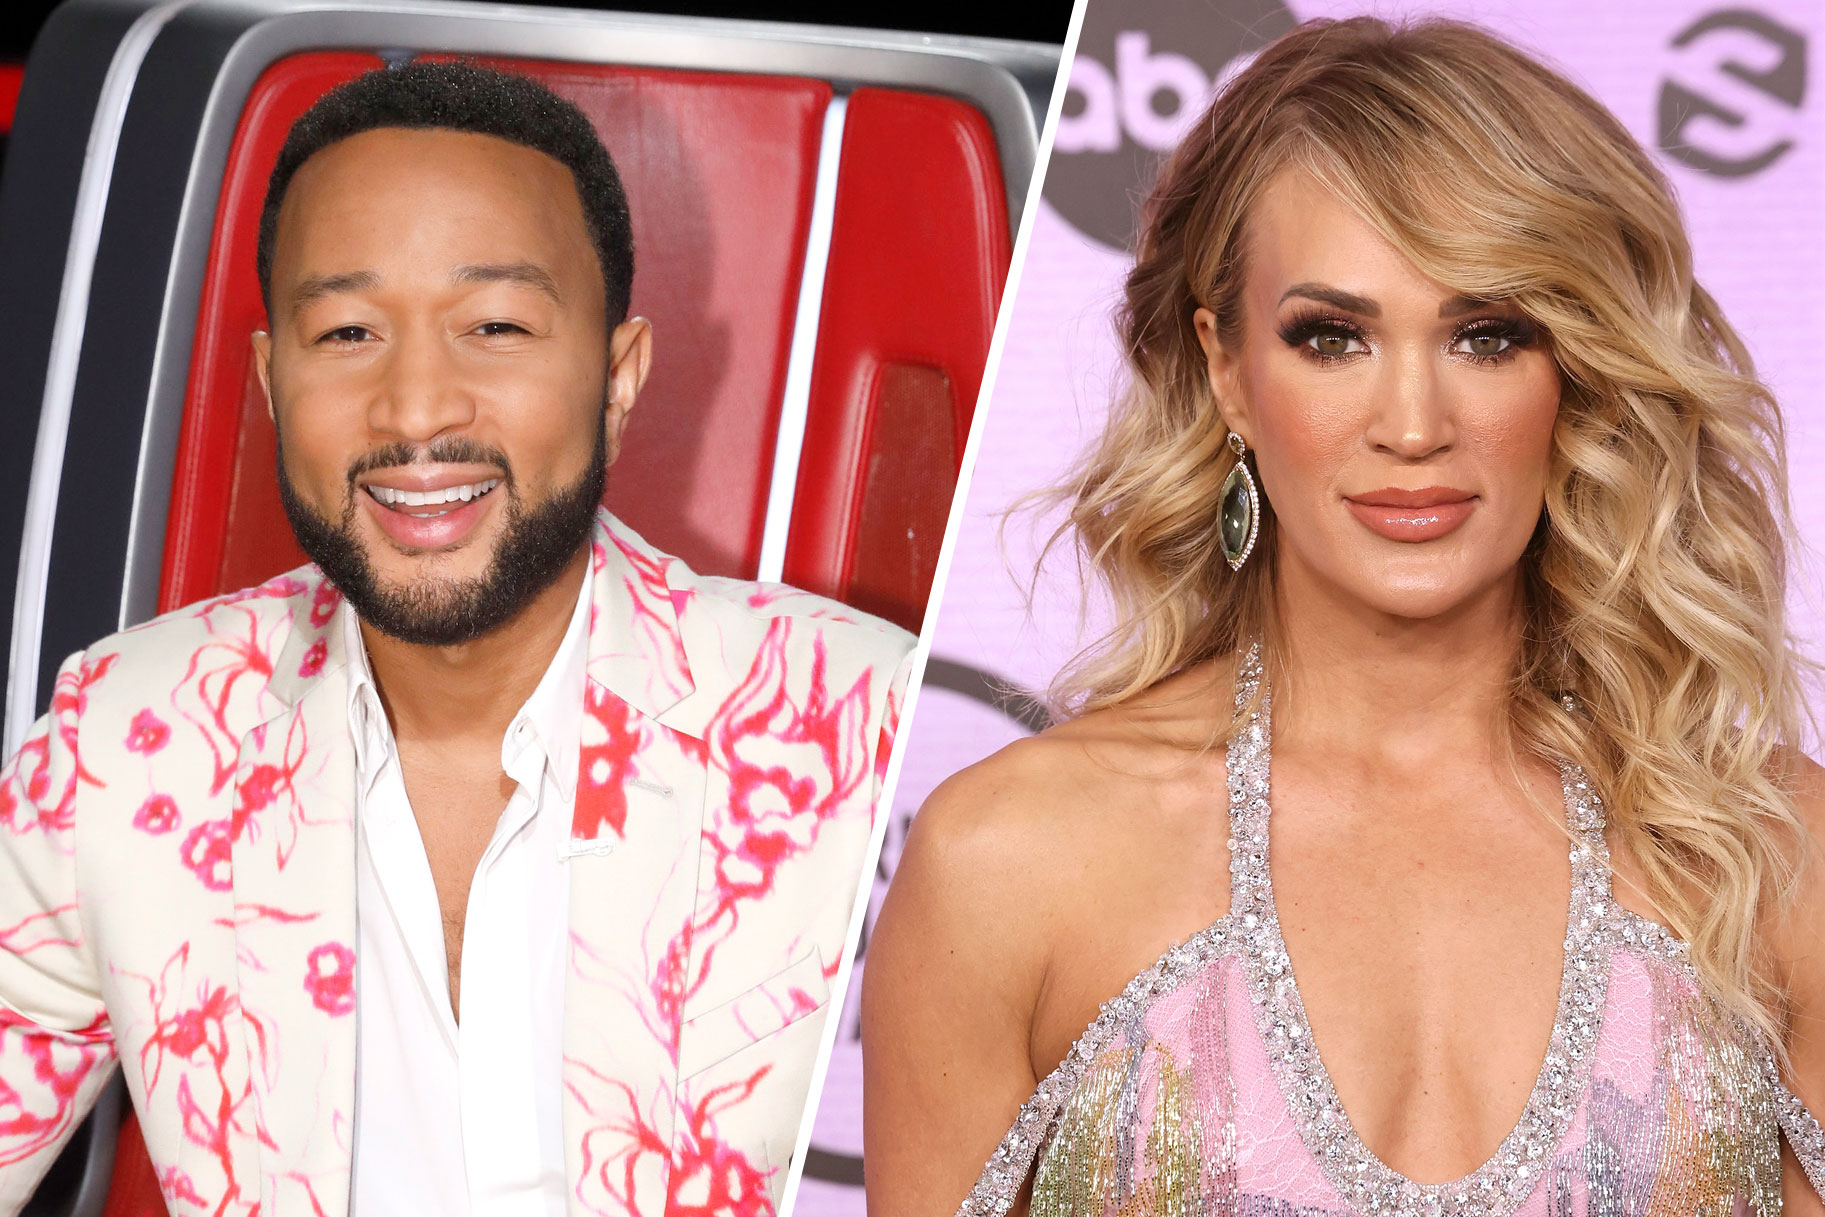 John Legend and Carrie Underwood from The Voice